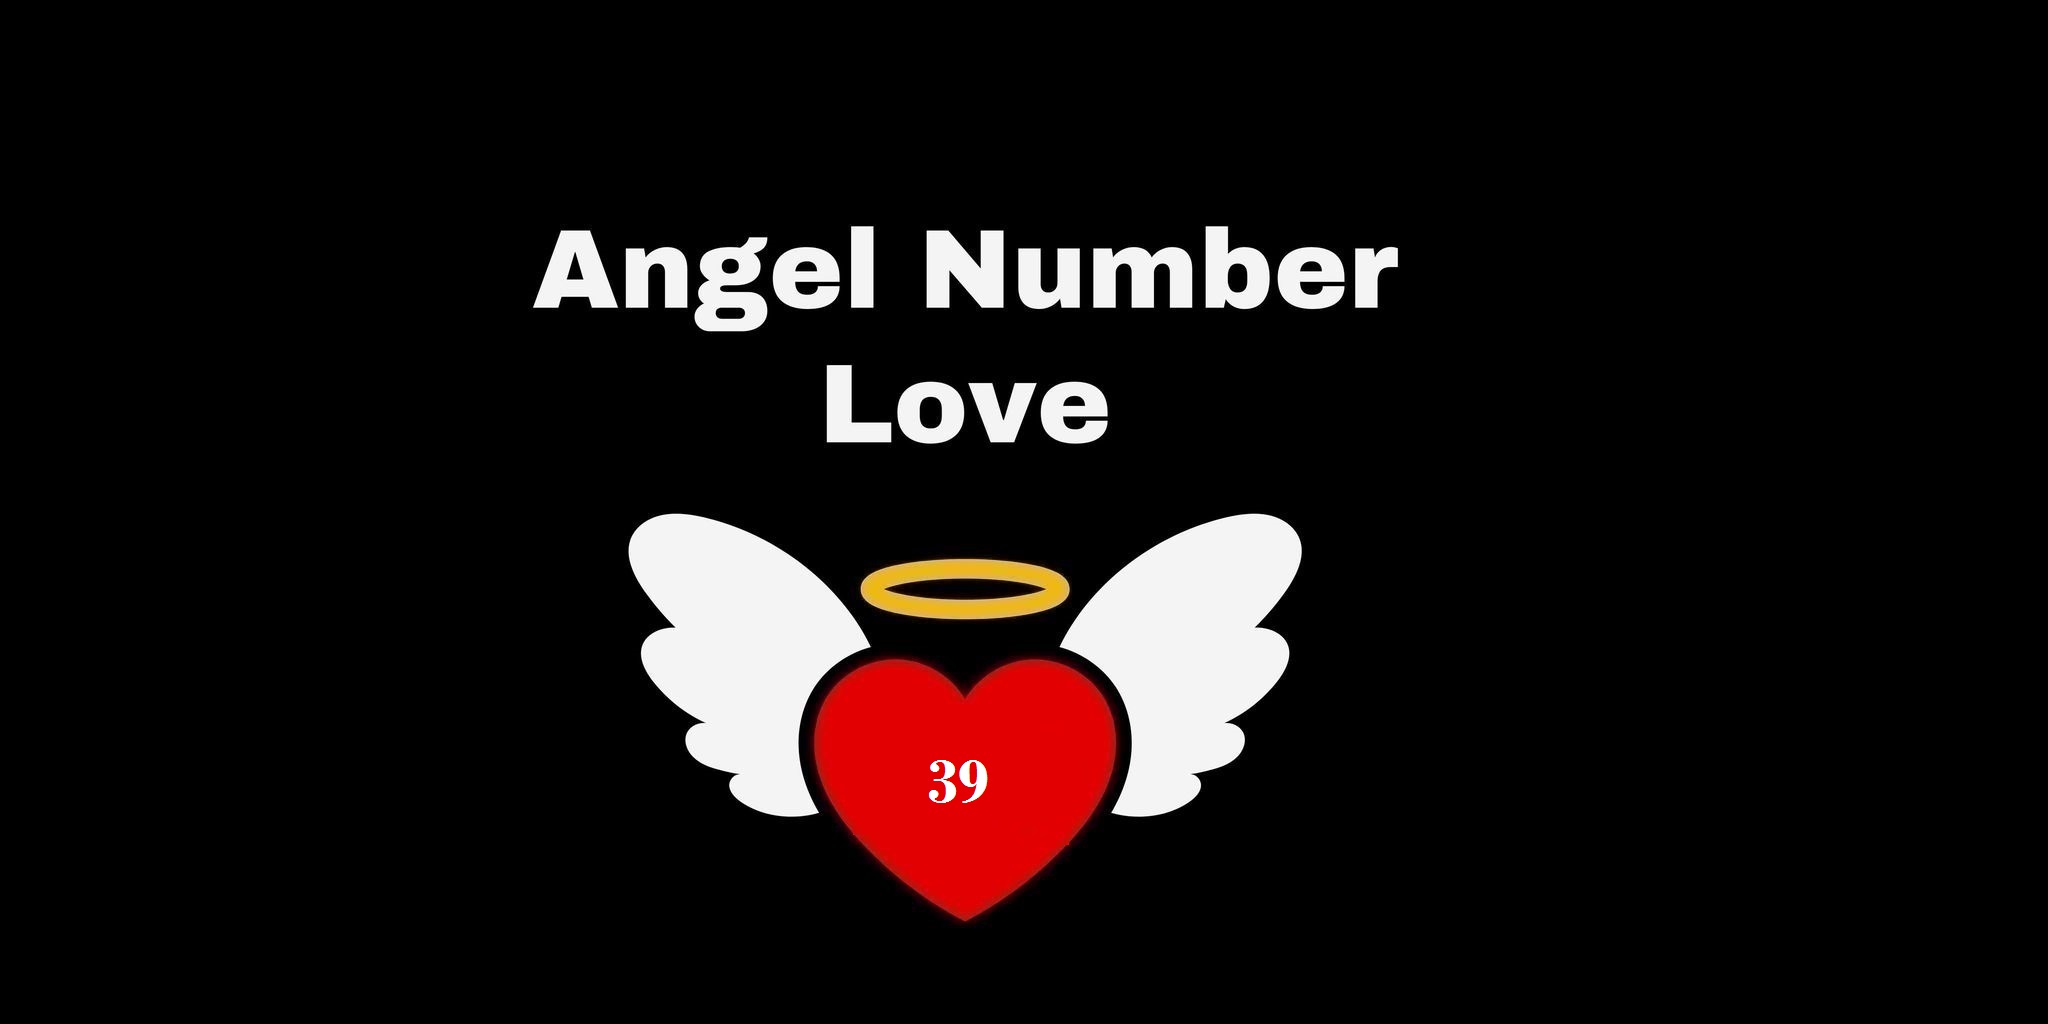 39 Angel Number Meaning In Love